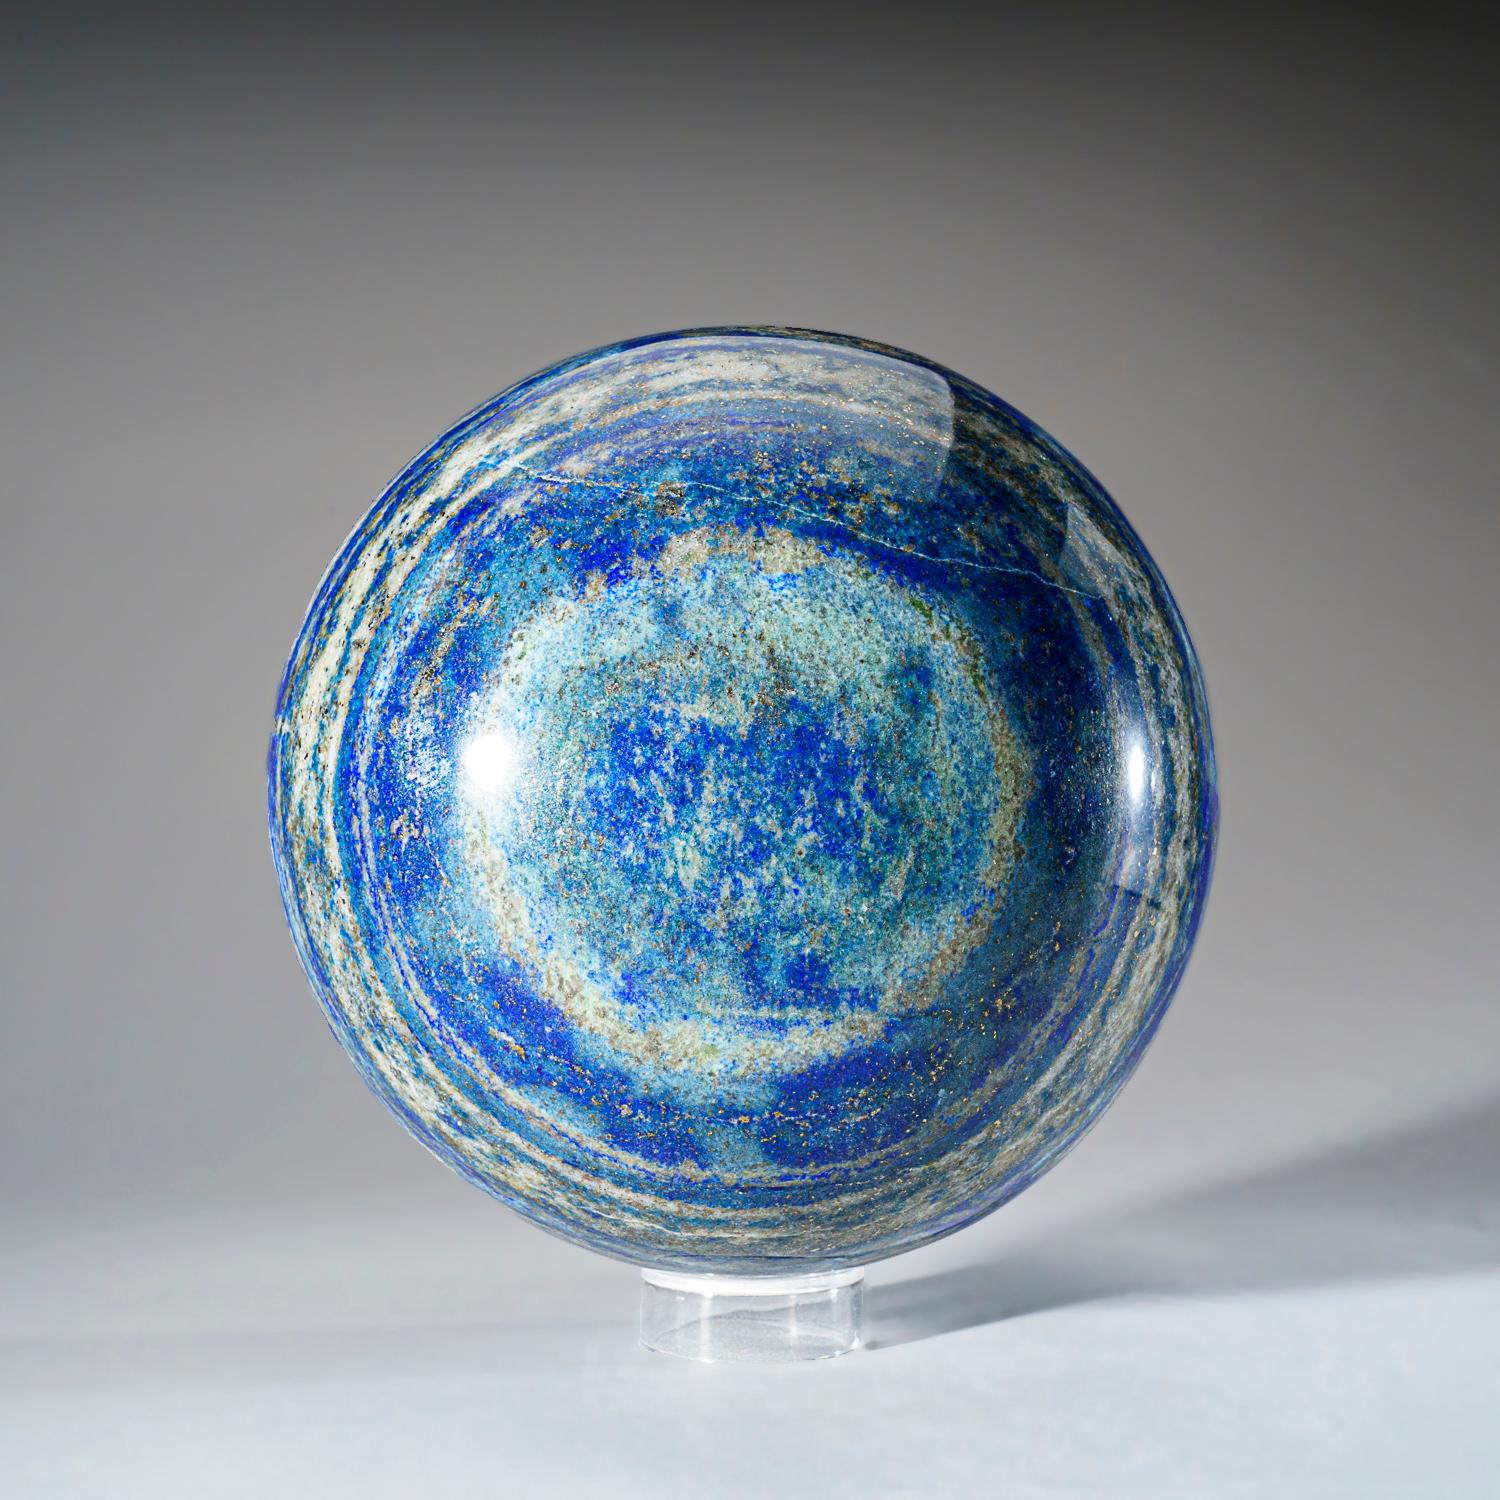 Polished Lapis Lazuli Sphere from Afghanistan (5